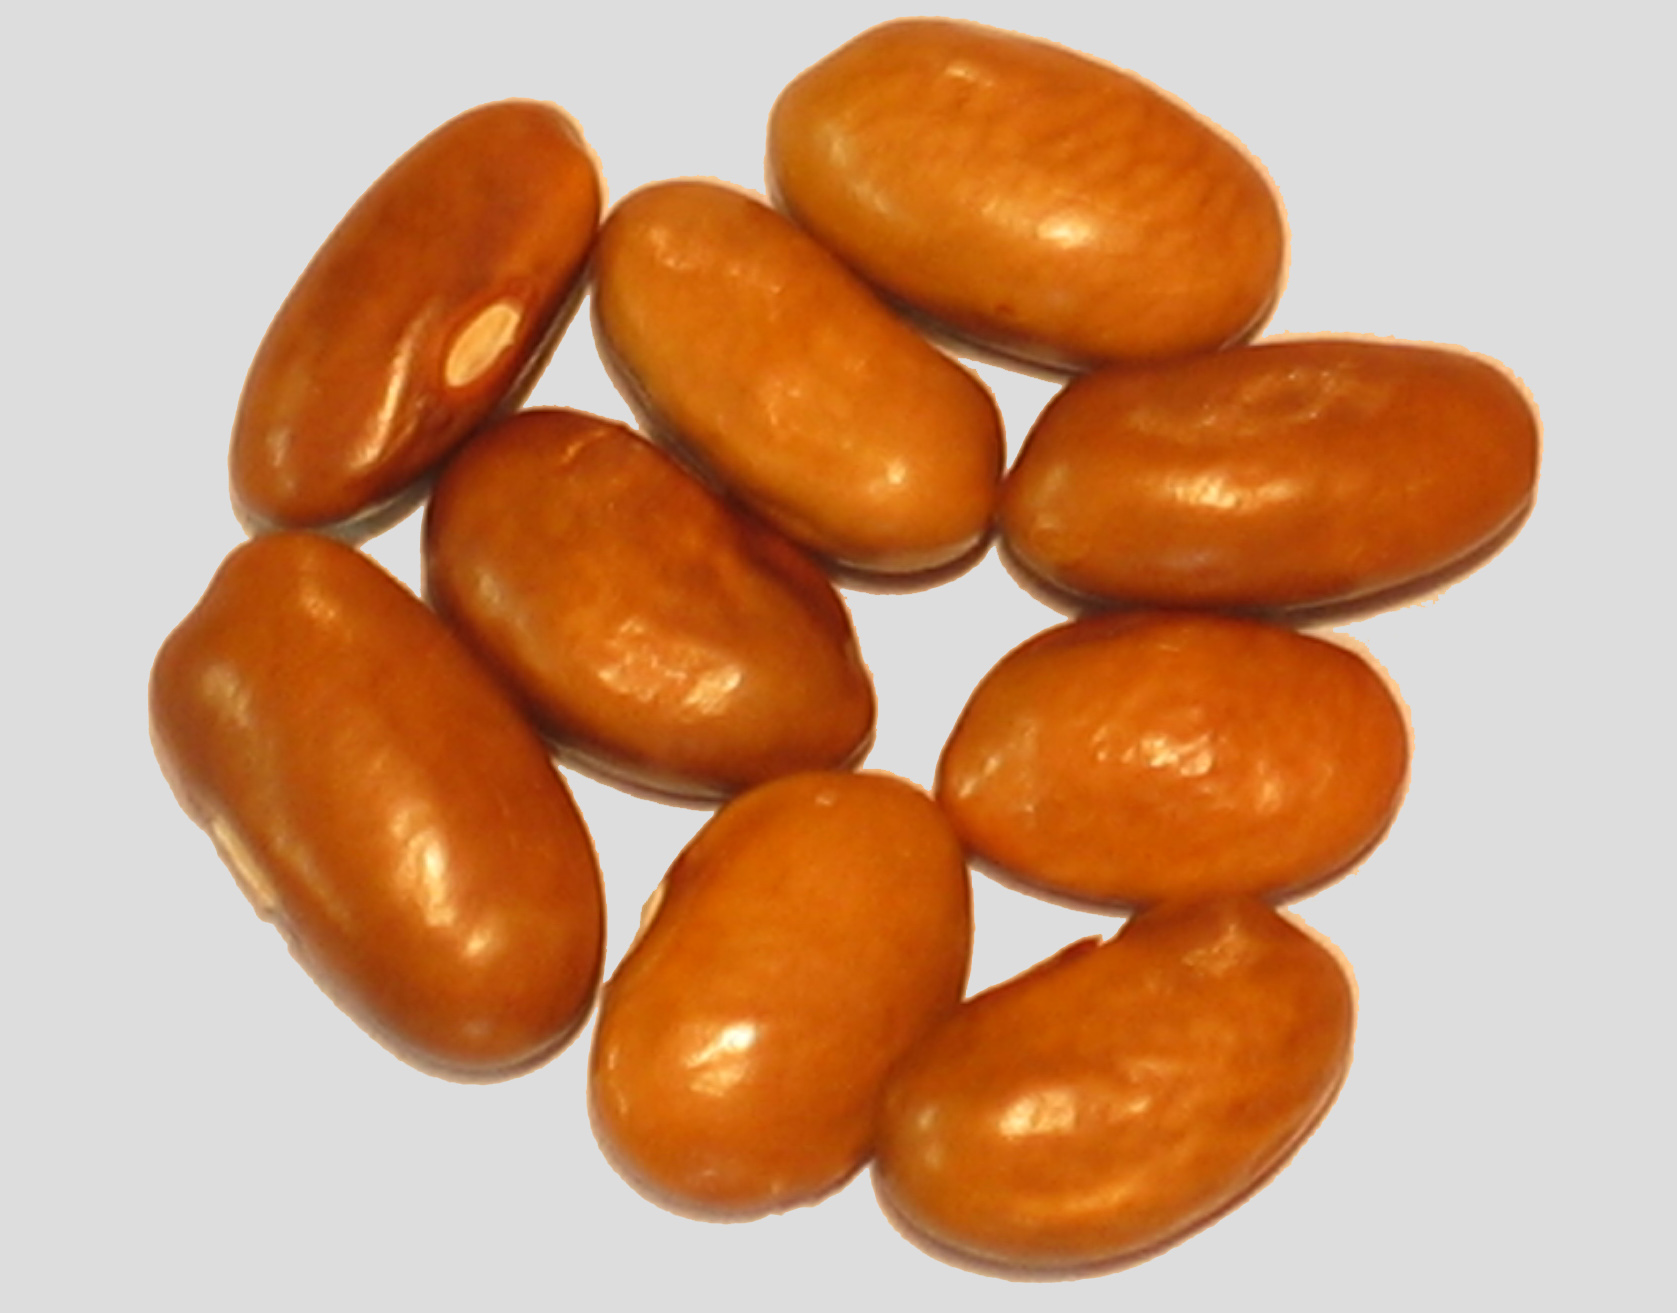 image of Tennessee Greenpod beans